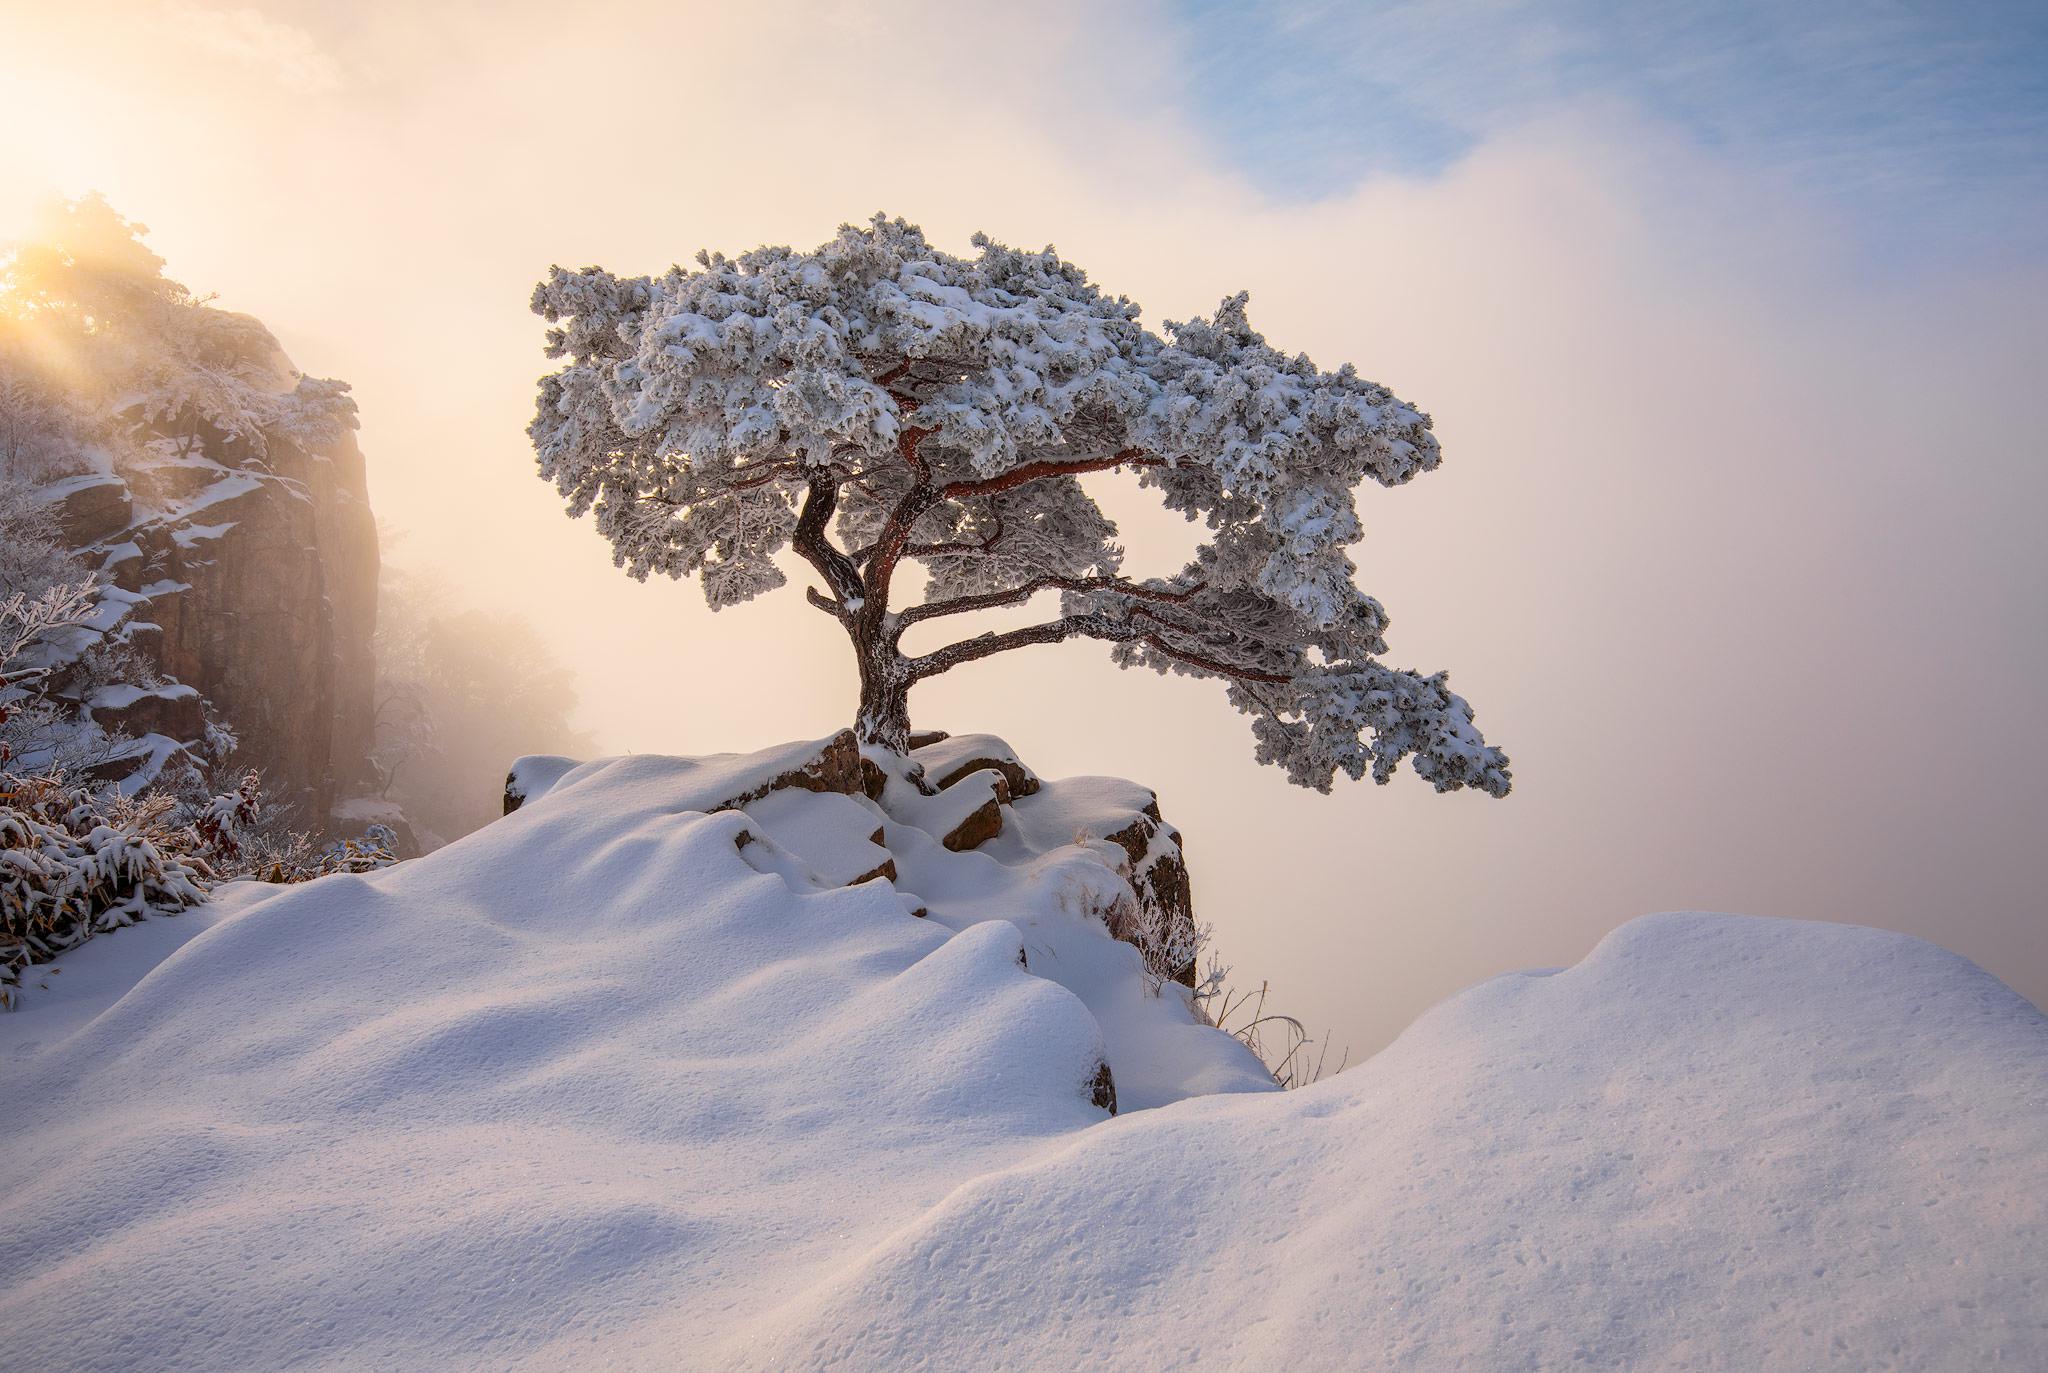 A snow-covered tree on the edge of a cliff